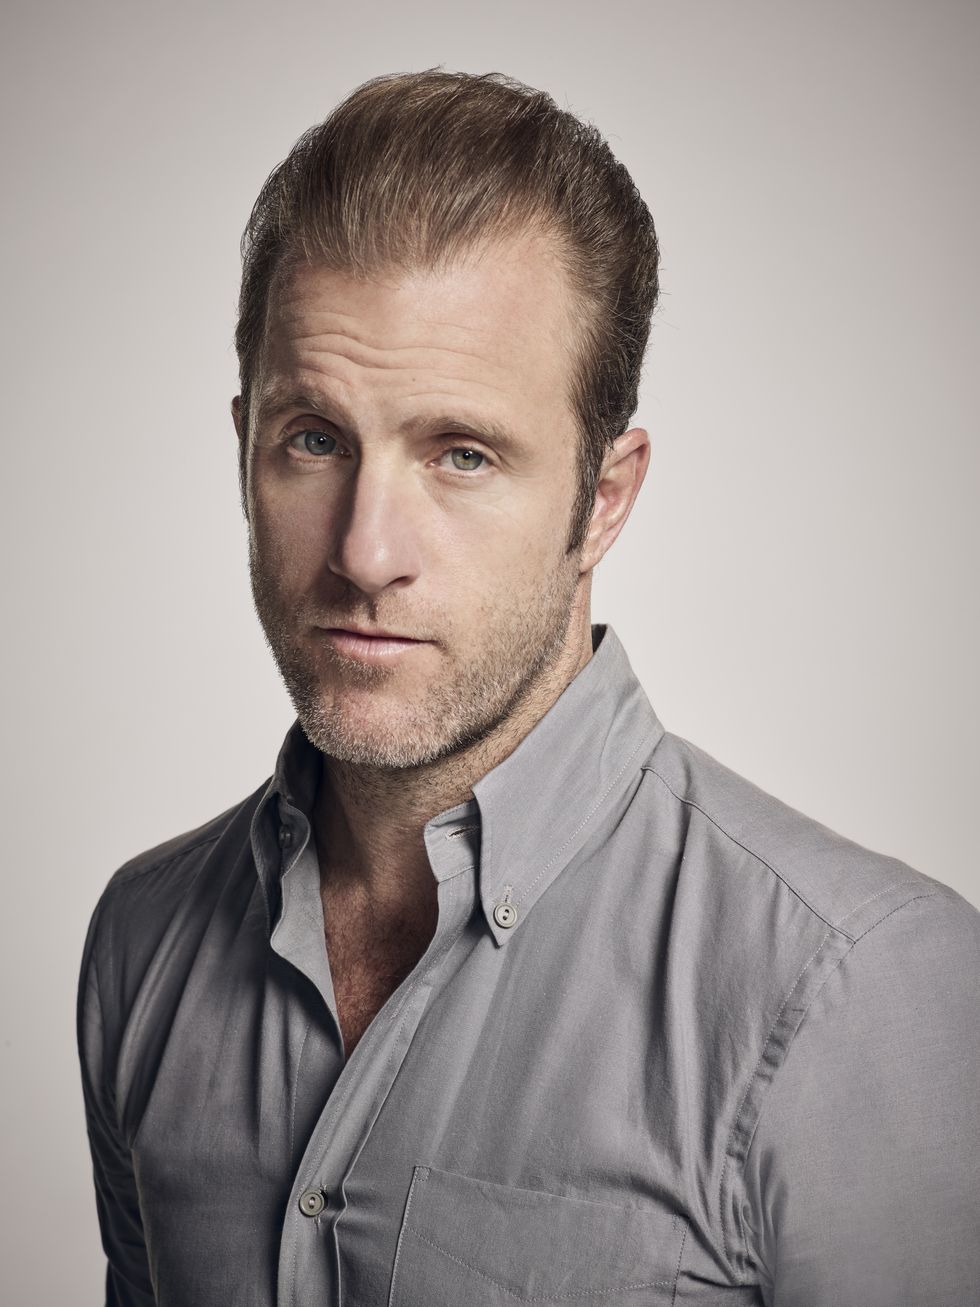 honolulu   october 5 scott caan of the cbs series hawaii five 0, scheduled to air on the cbs television network photo by justin stephenscbs via getty images